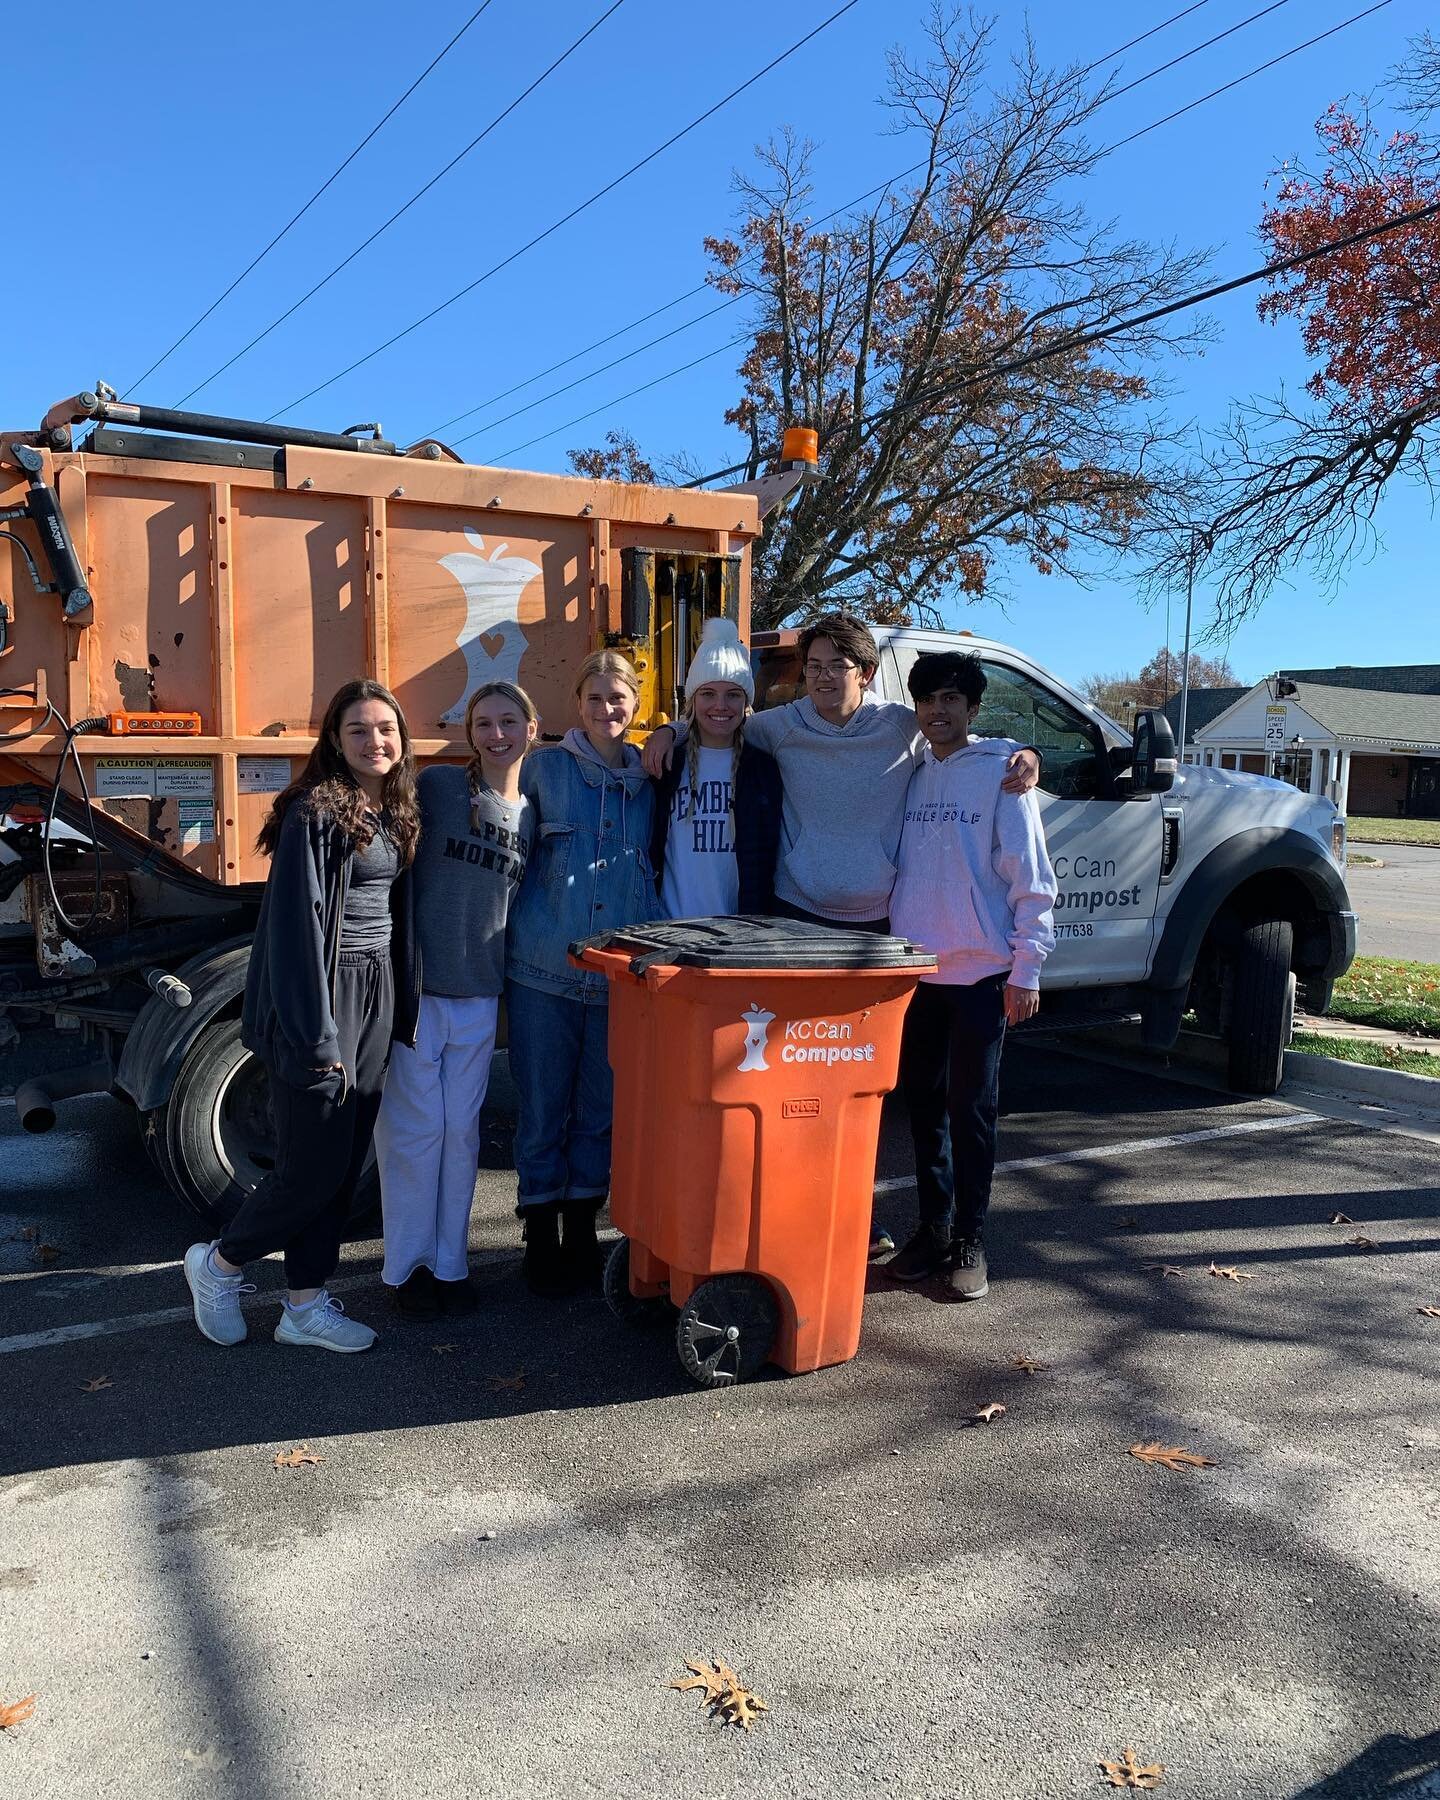 Thank you to our volunteers and everyone who dropped off pumpkins!🎃🎃 First Great Pumpkin Rescue was a success!!

#kccancompost #kccan #kansascity #compost #environment #environmental #sustainability #landfill #compostbin #corinth #kansas #missouri 